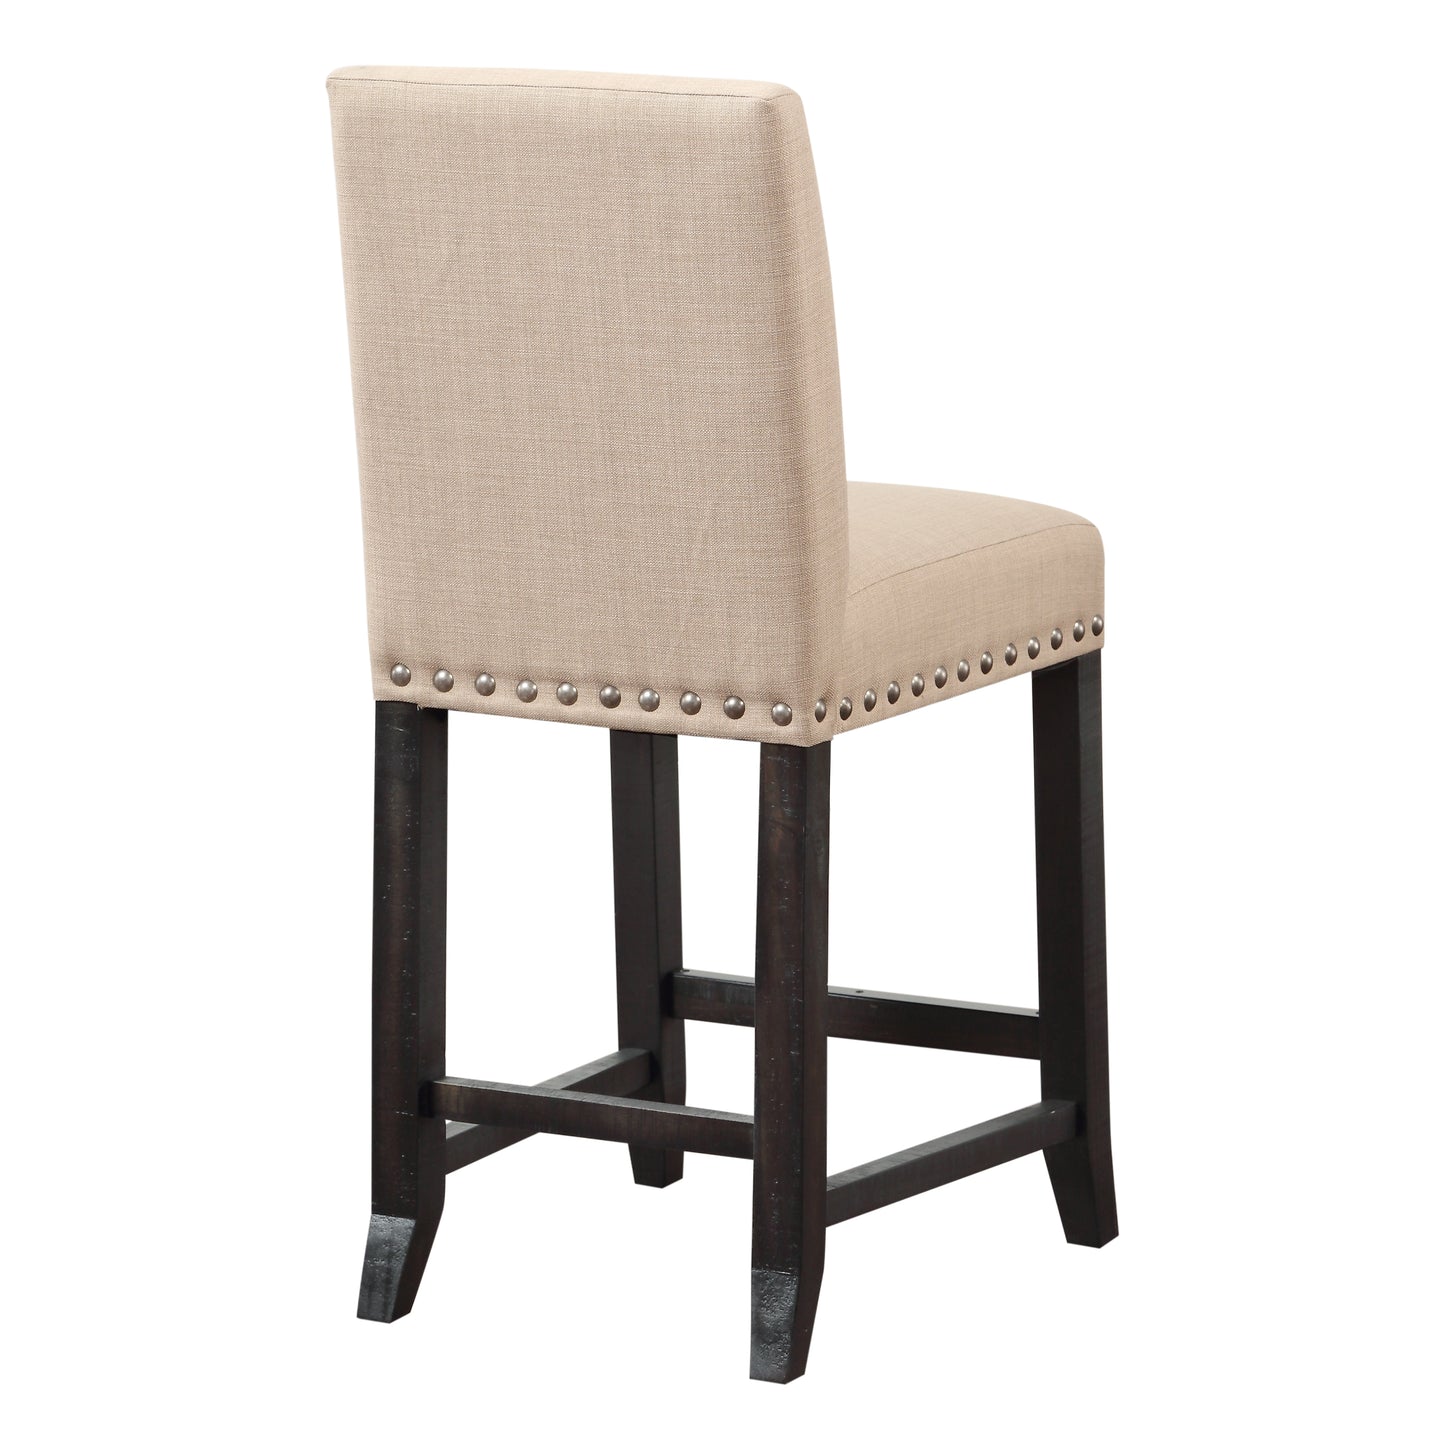 Fabric Upholstered Wooden Counter Height Stool With Nail Head Trim